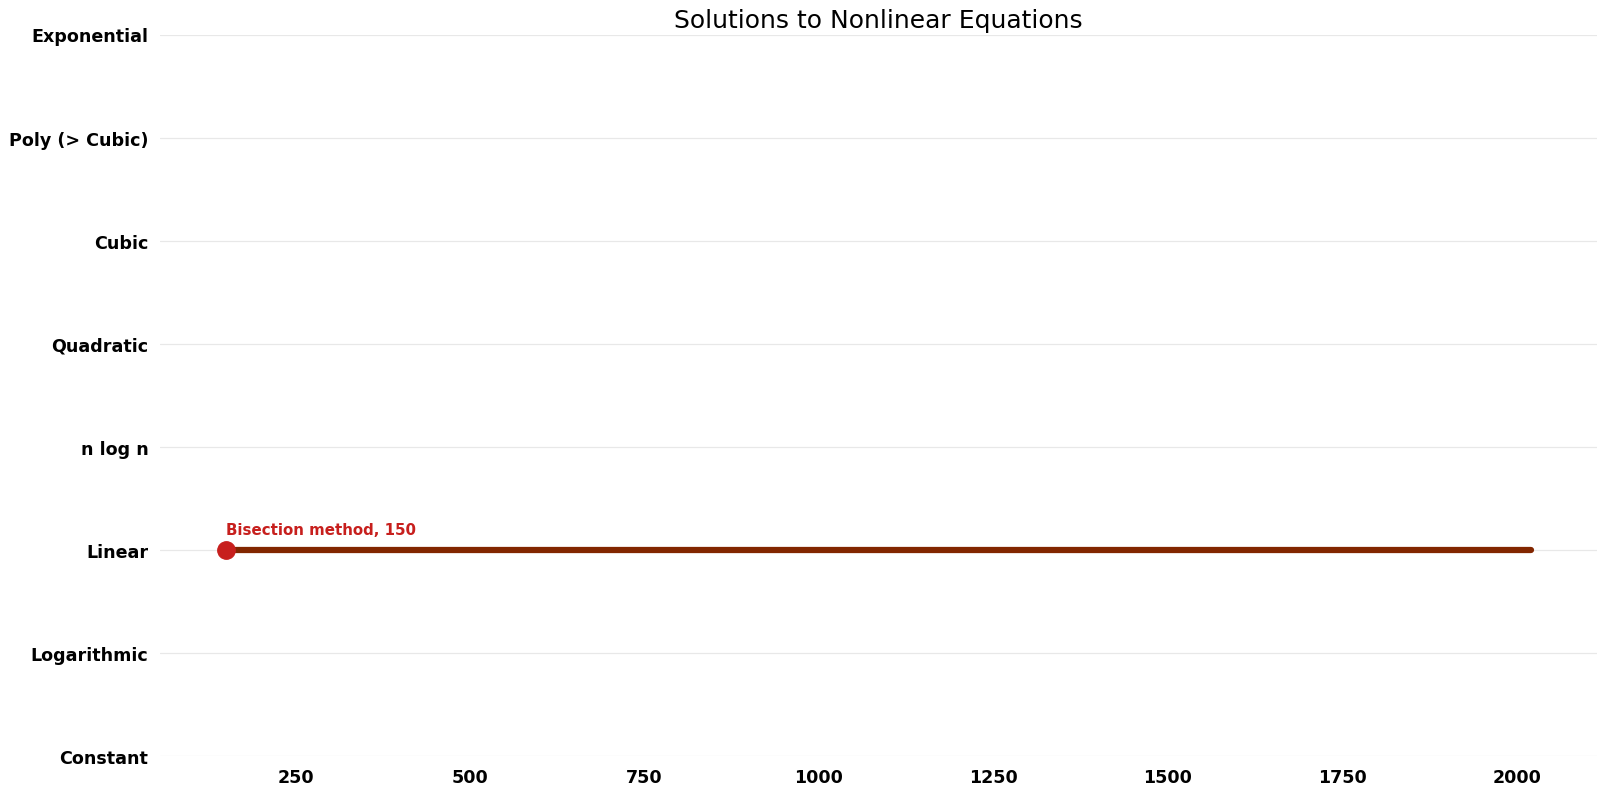 Solutions to Nonlinear Equations - Time.png